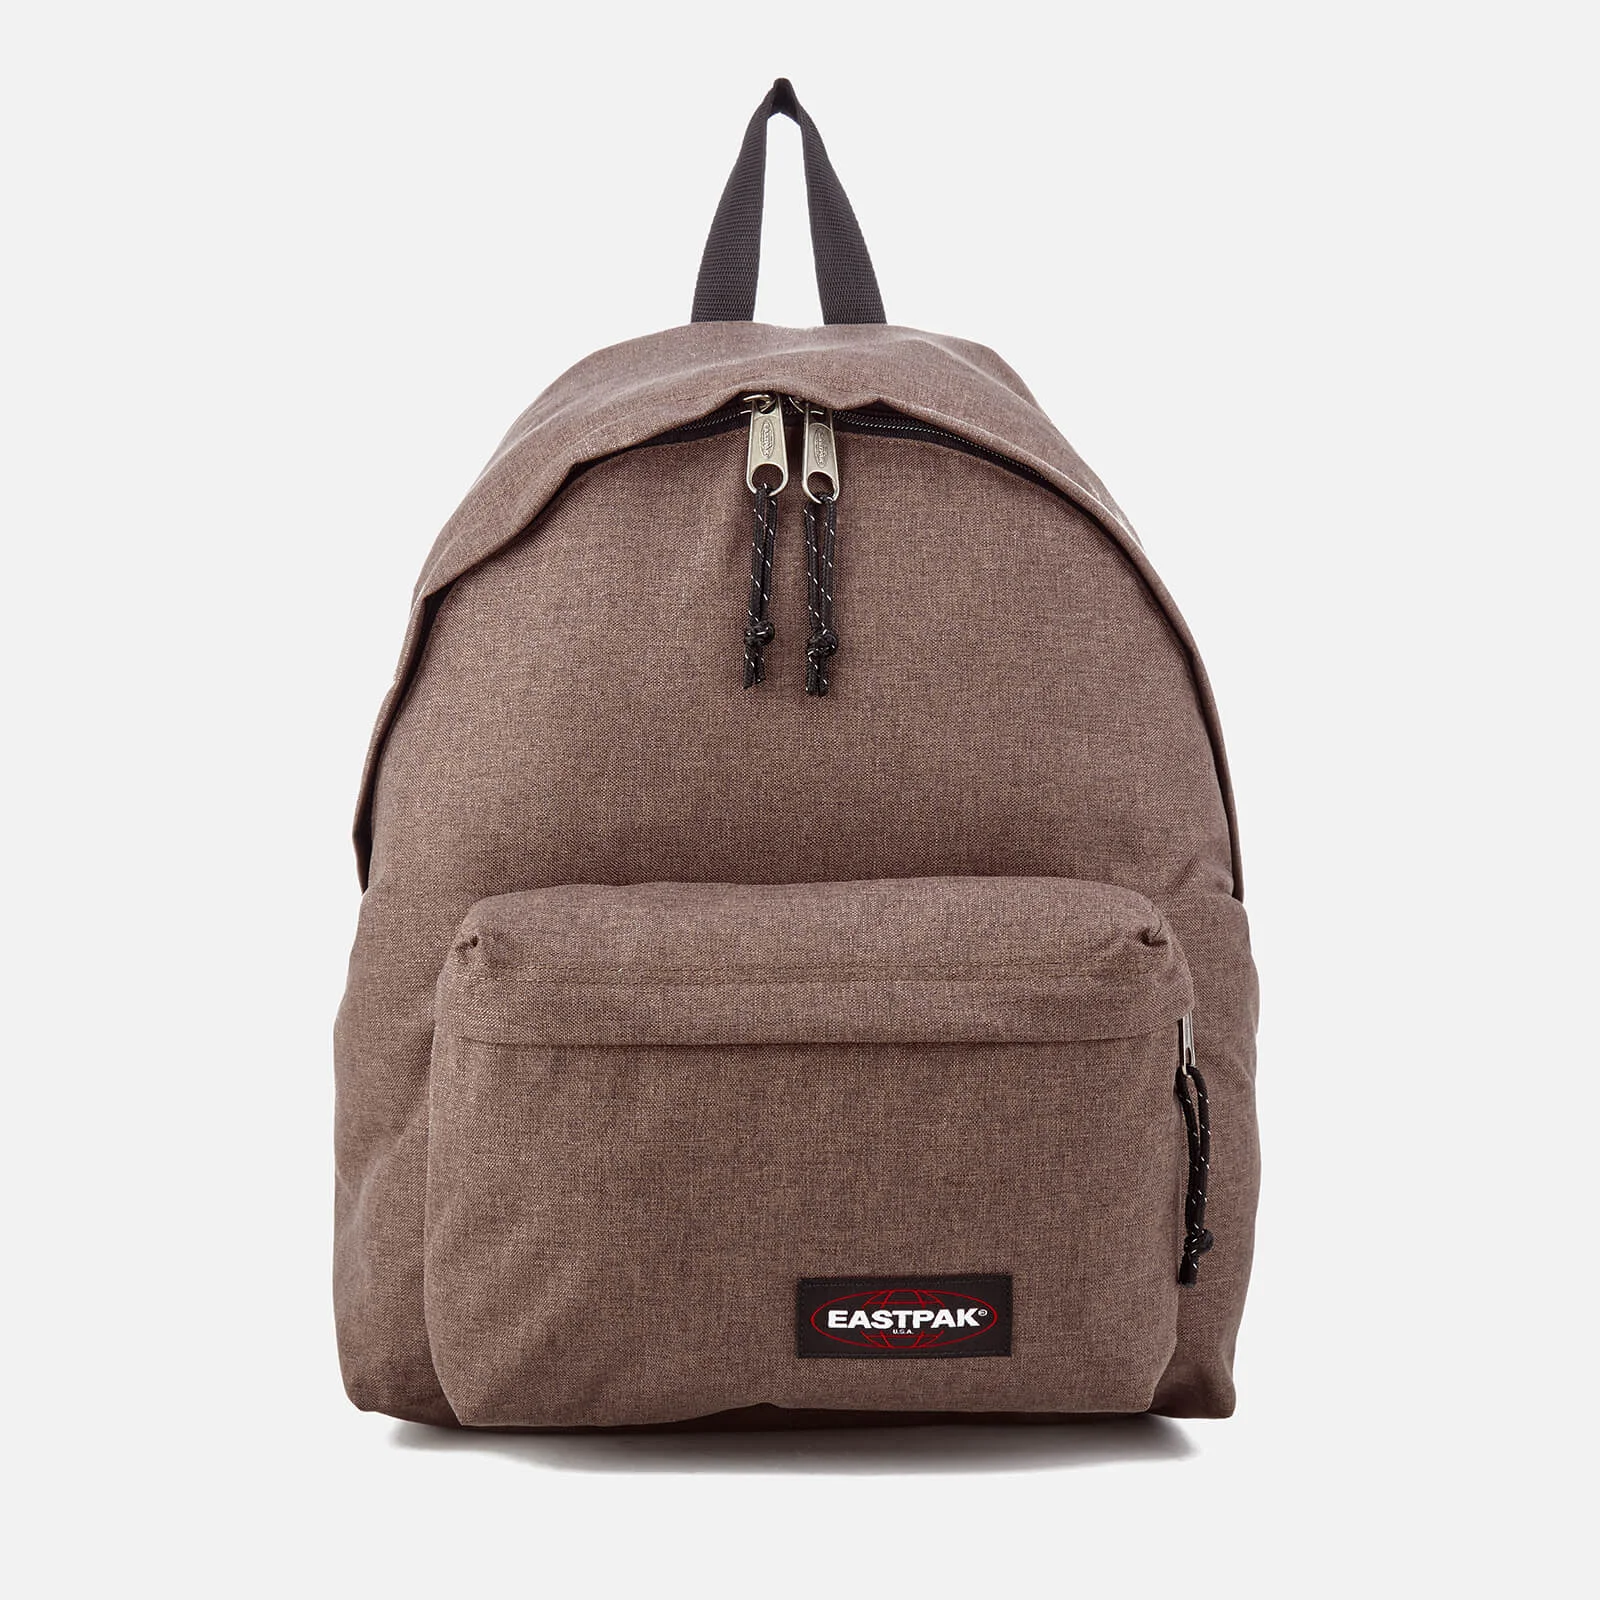 Eastpak Men's Authentic Padded Pak'r Backpack - Crafty Brown Image 1